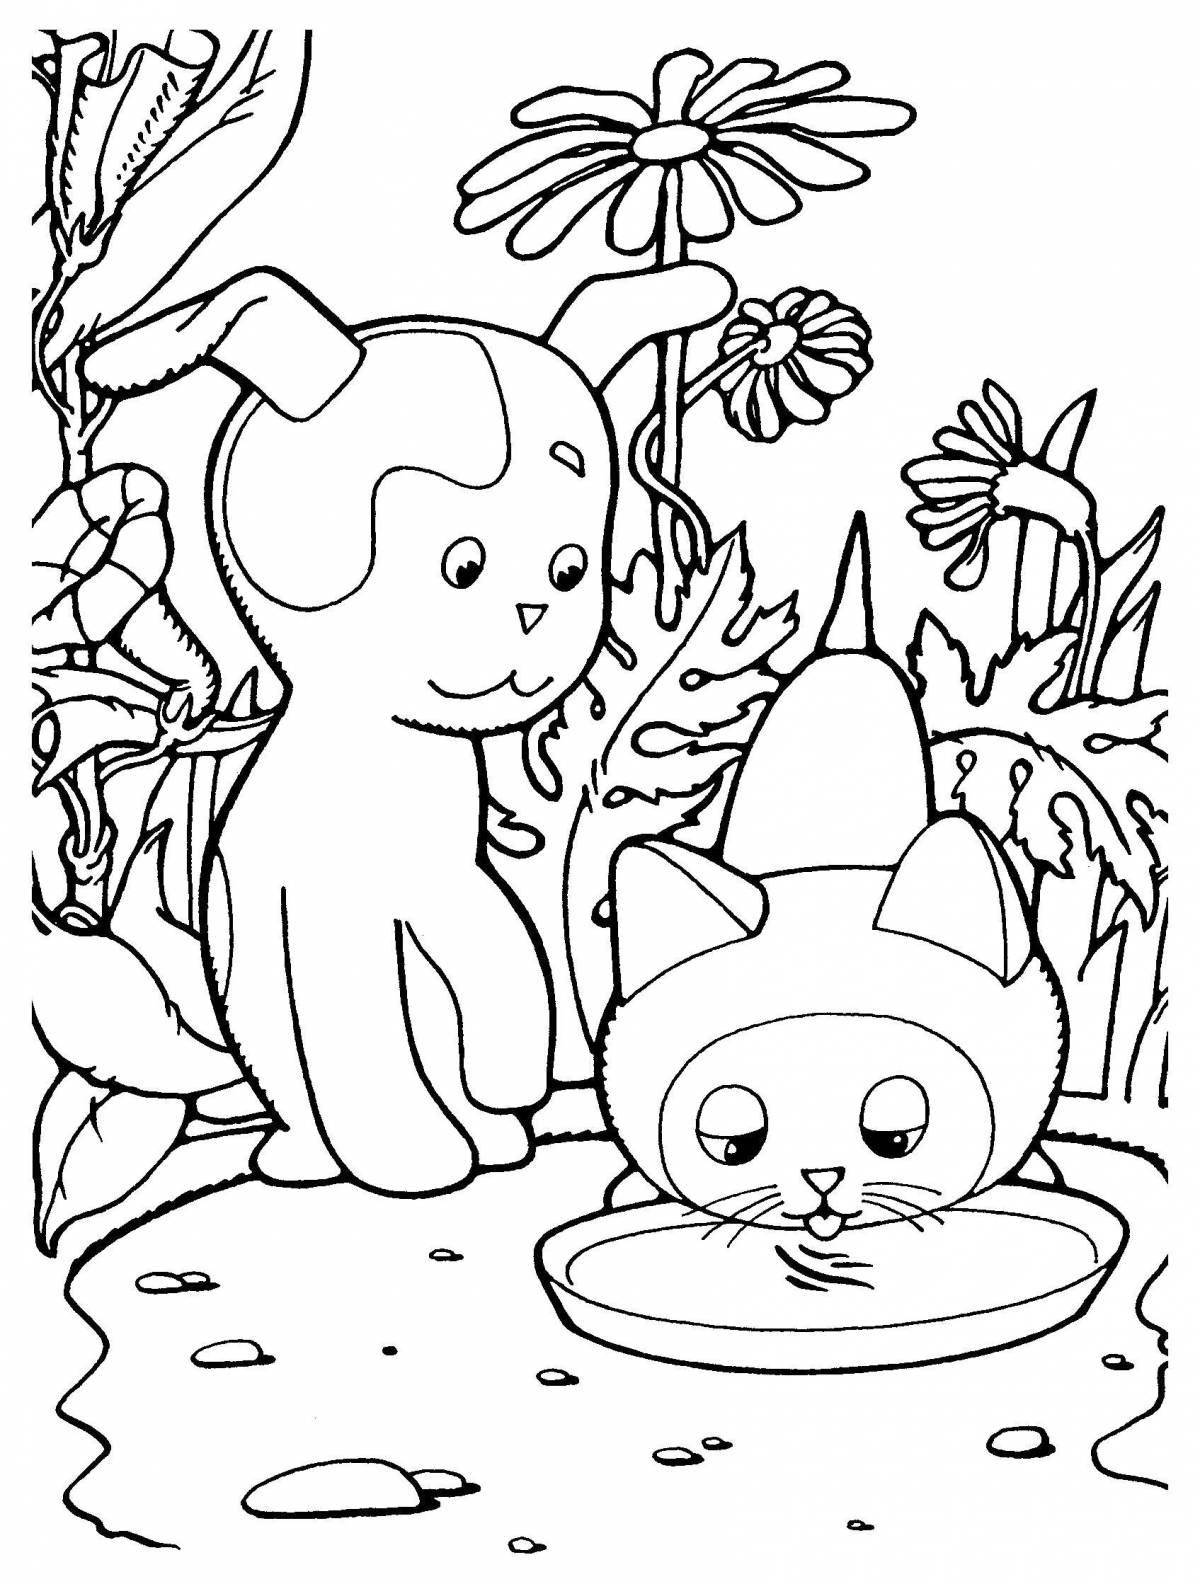 Fun coloring pages for kids cartoons